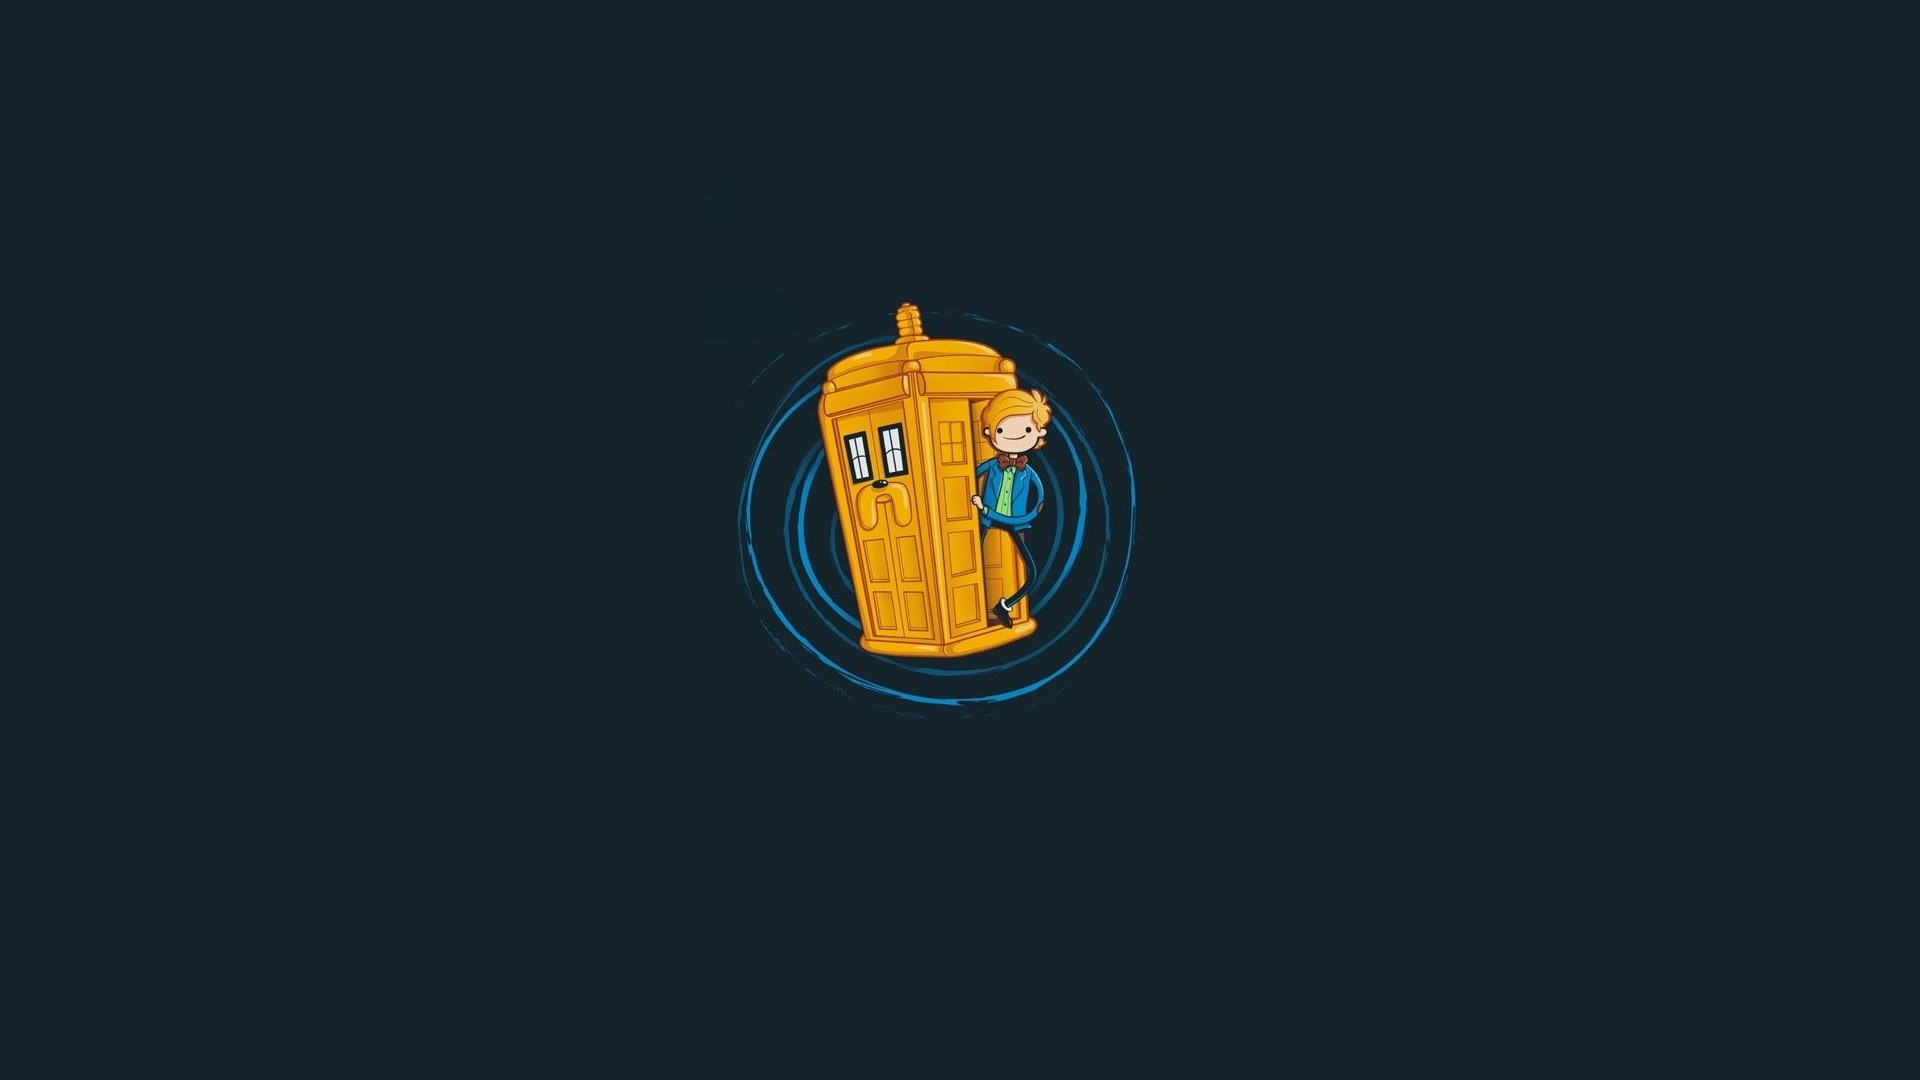 5. doctor who wallpaper iphone6 600×338